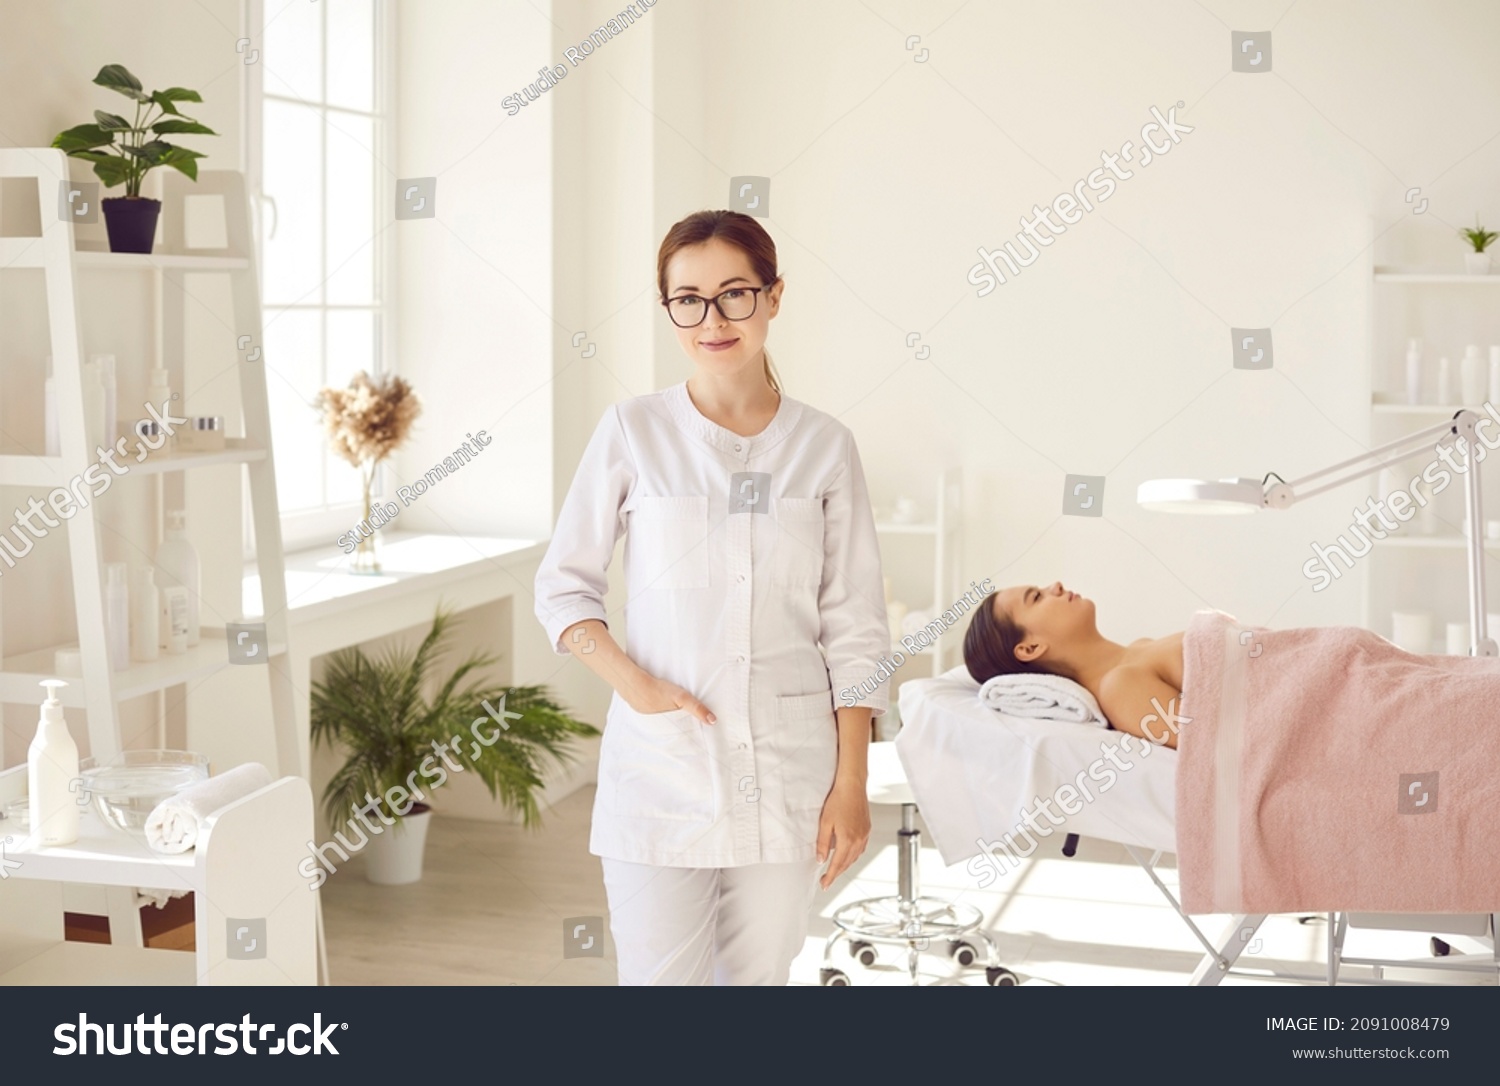 Female dermatologist, skin therapist, beautician and skincare professional with patient in office. Beautiful woman in coat uniform and glasses standing in room for examinations and cleaning procedures #2091008479